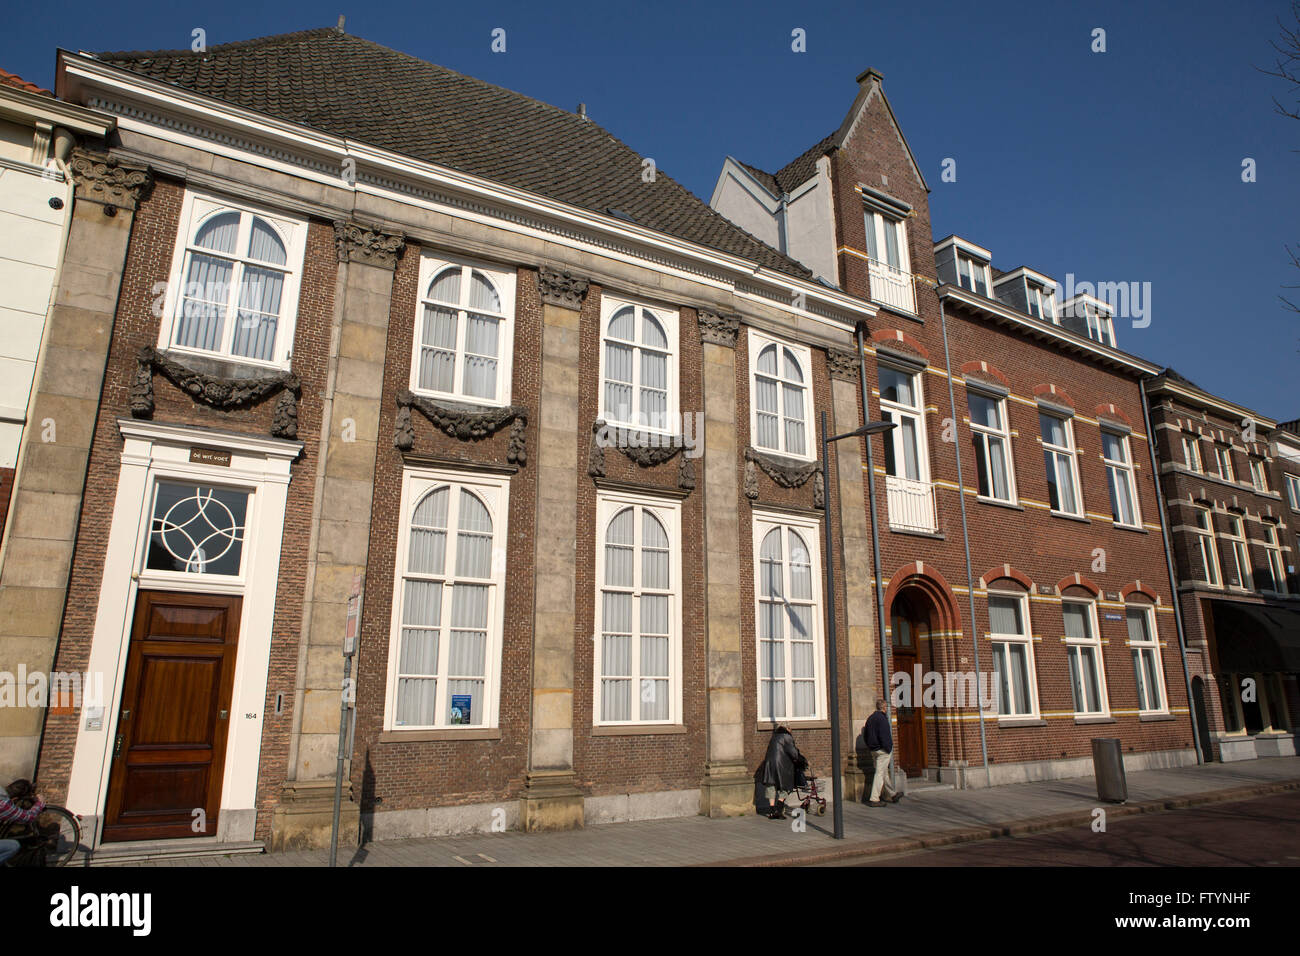 Townhouses in 's-Hertogenbosch in the Netherlands. The brick buildings stand in the city, also known as Den Bosch. Stock Photo